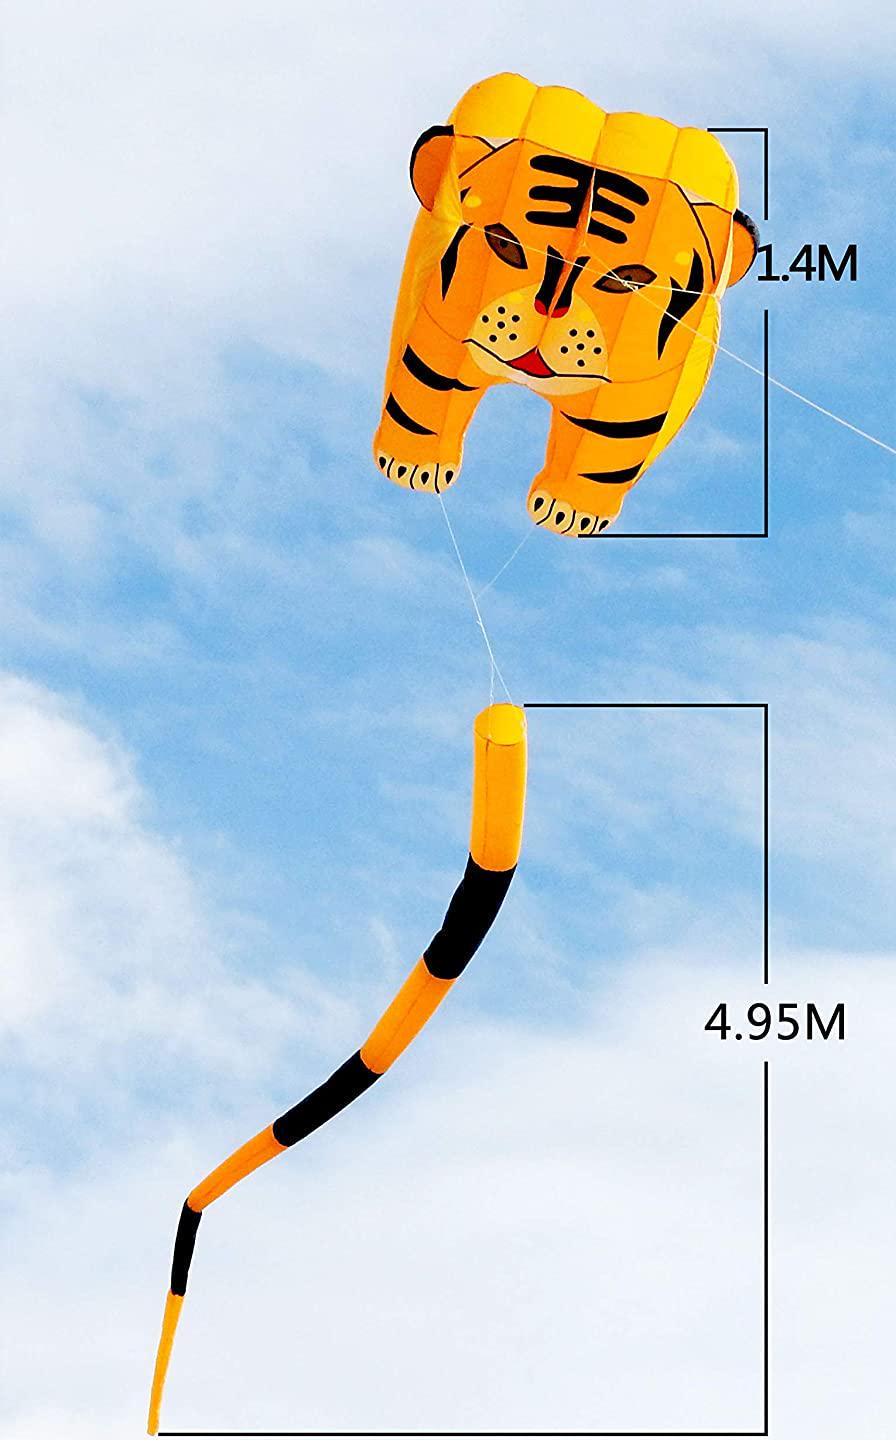 Fullfar, Fullfar Tiger 3D Kite for Adult, Soft Nylon Material Parafoil Kite for Kids. Easy to Fly 244×39 inch with Kite String and Backpack, Perfect Kite for The Beach or Park.